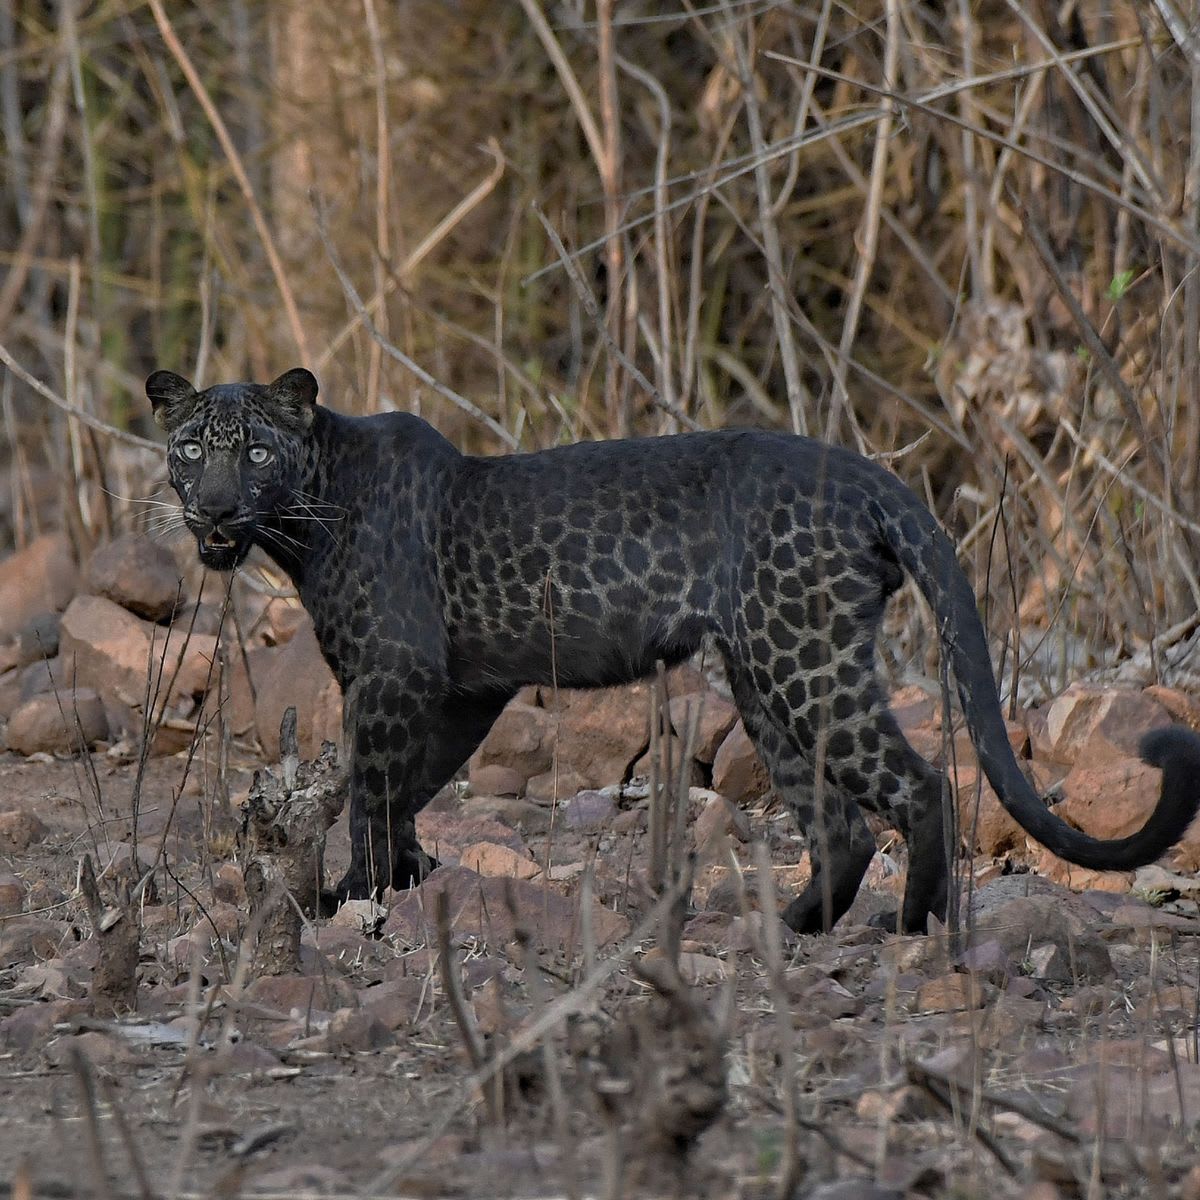 This very rare and majestic black leopard spotted in India.